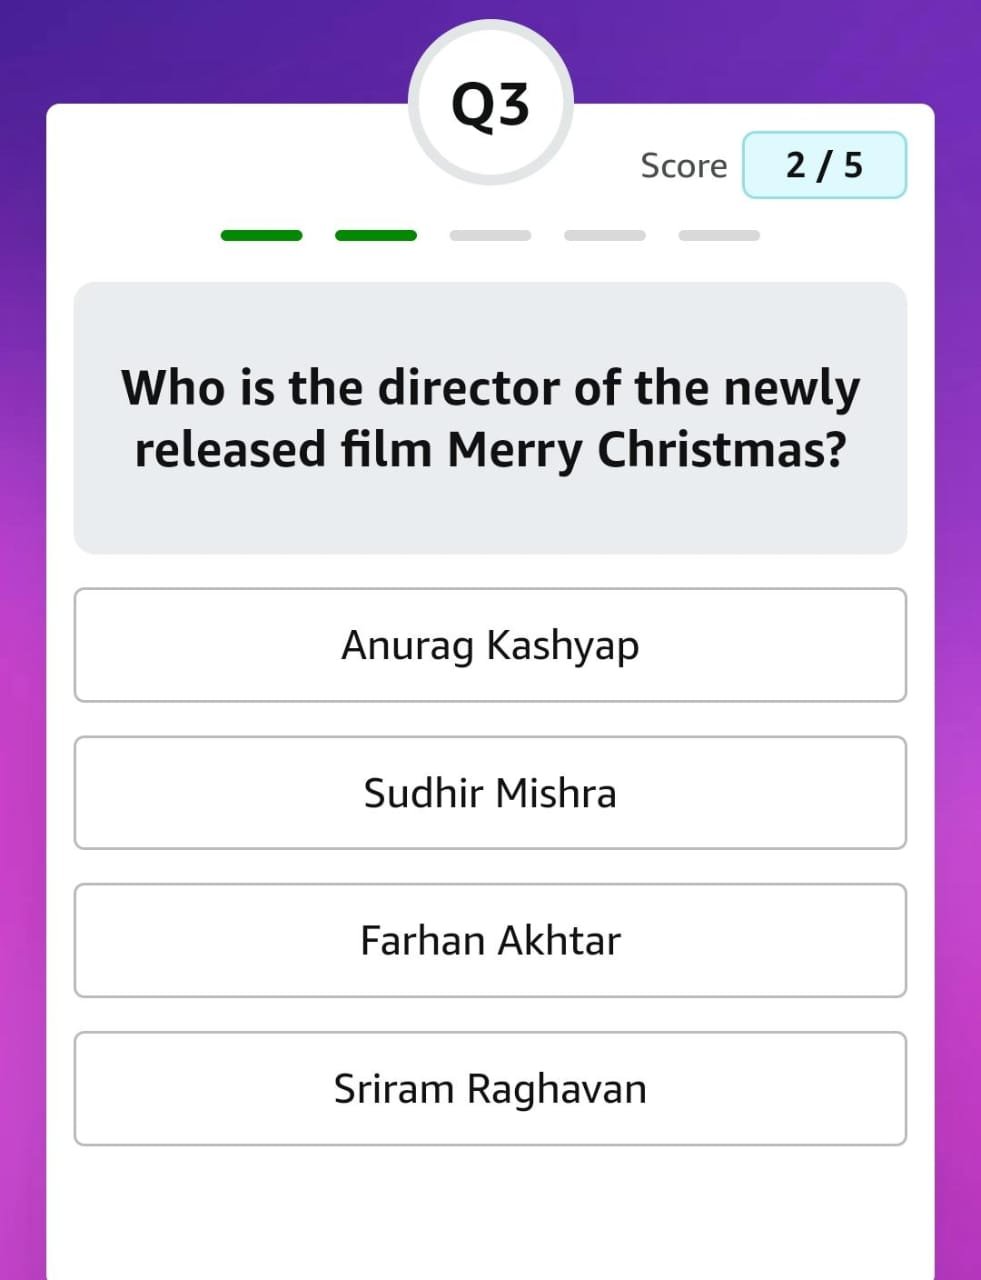 Who is the director of the newly released film Merry Christmas